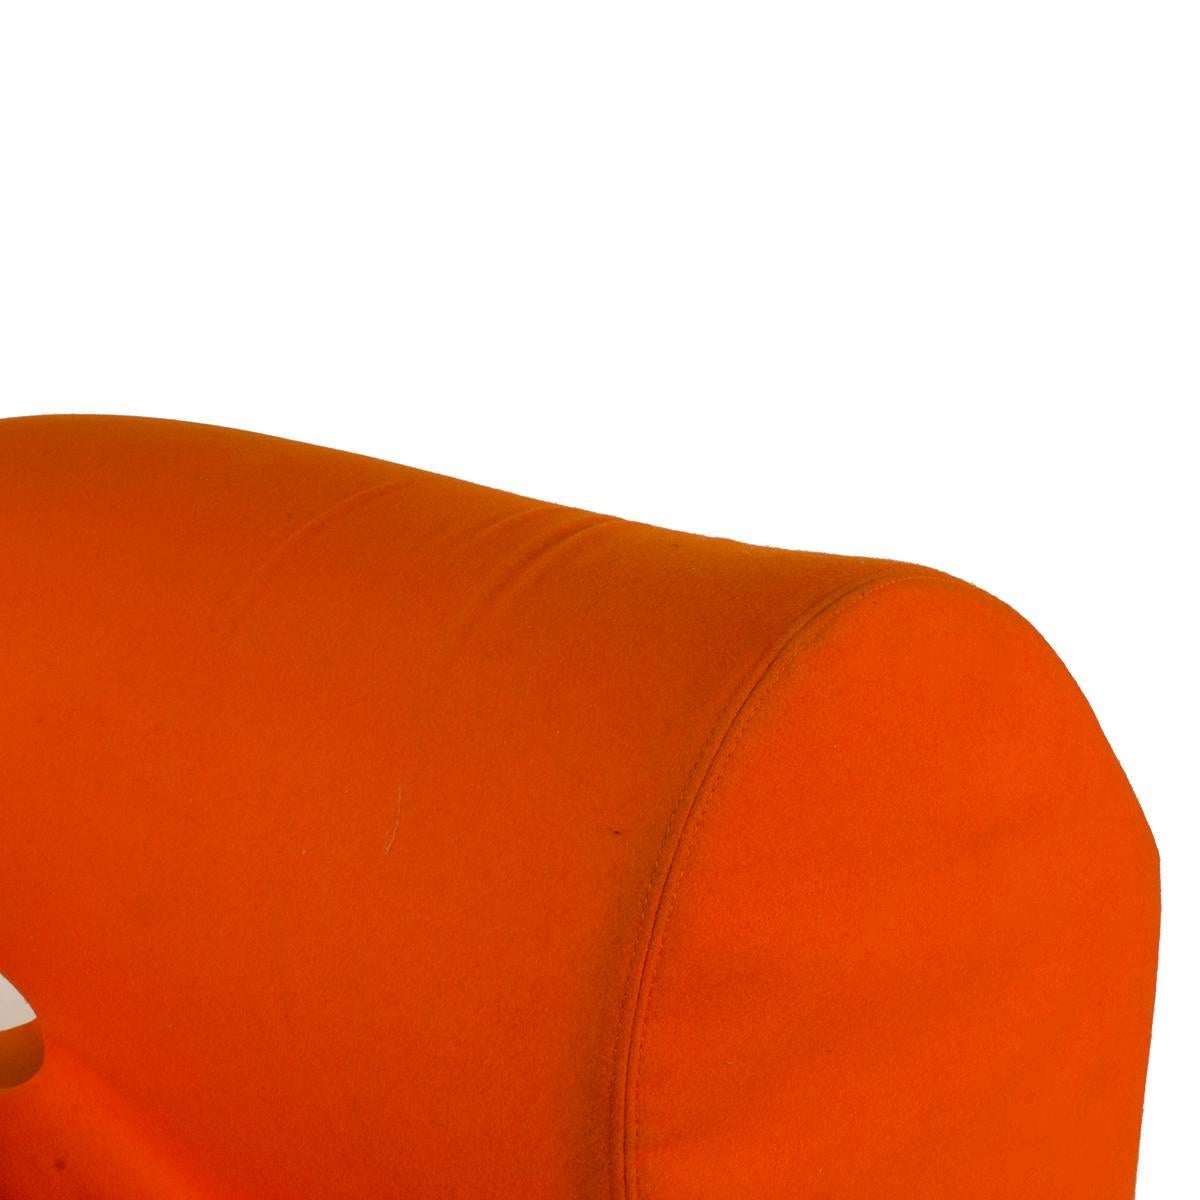 Foam Moroso Orange Misfits Central 1 Modular Sectional Sofa Unit by Ron Arad, Italy For Sale